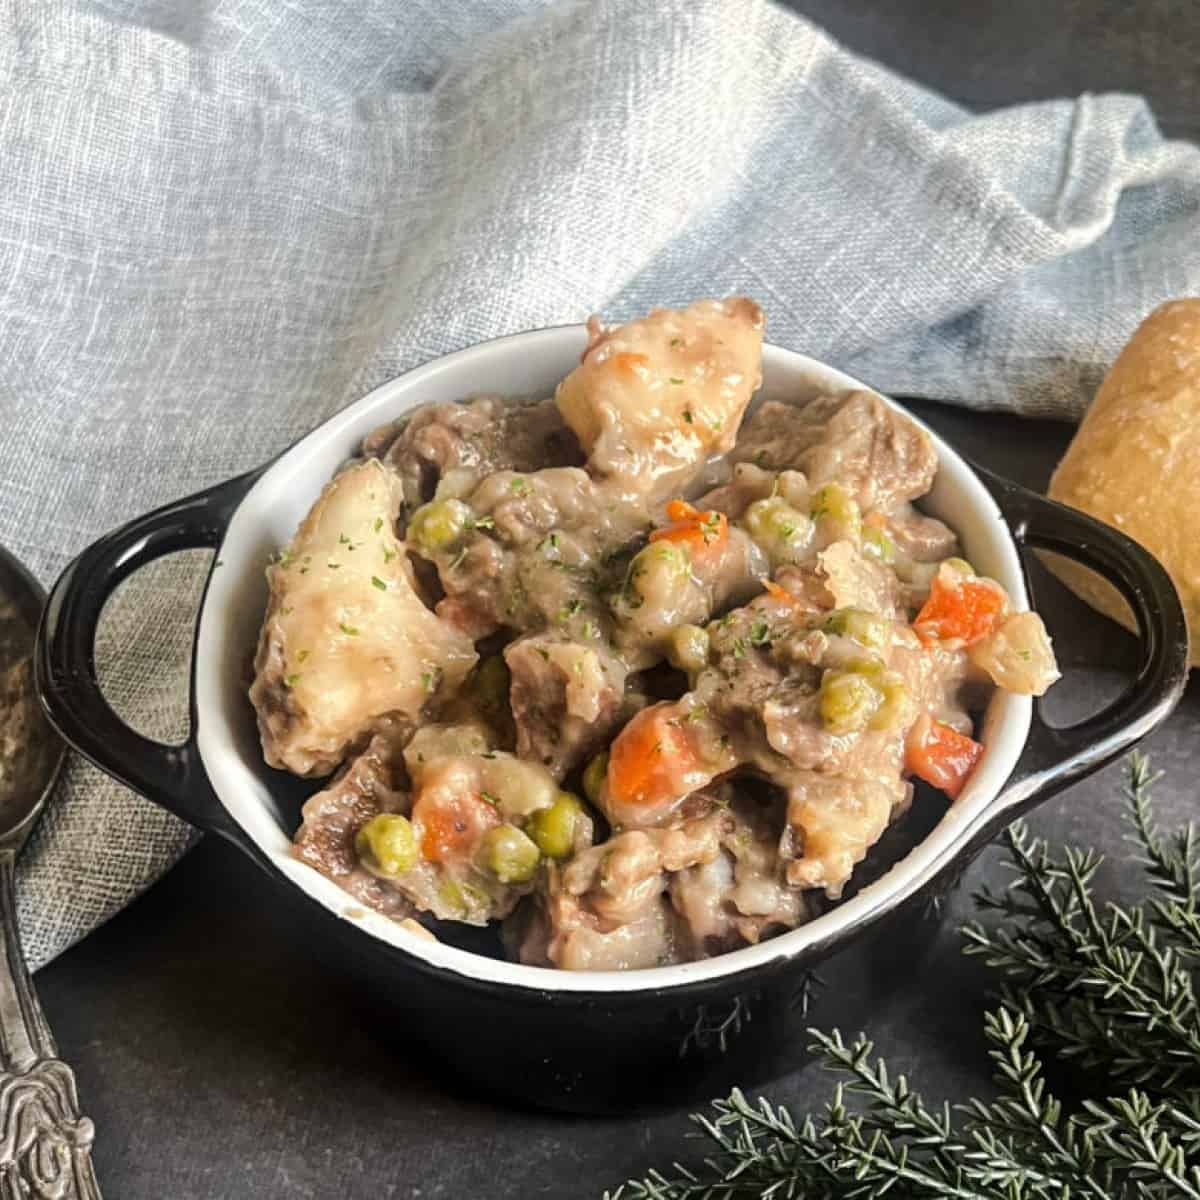 A bowl of beef stew with frozen vegetables, potatoes, carrots, and celery in a thick, brown gravy. The stew is garnished with fresh herbs and served with a side of crusty bread.